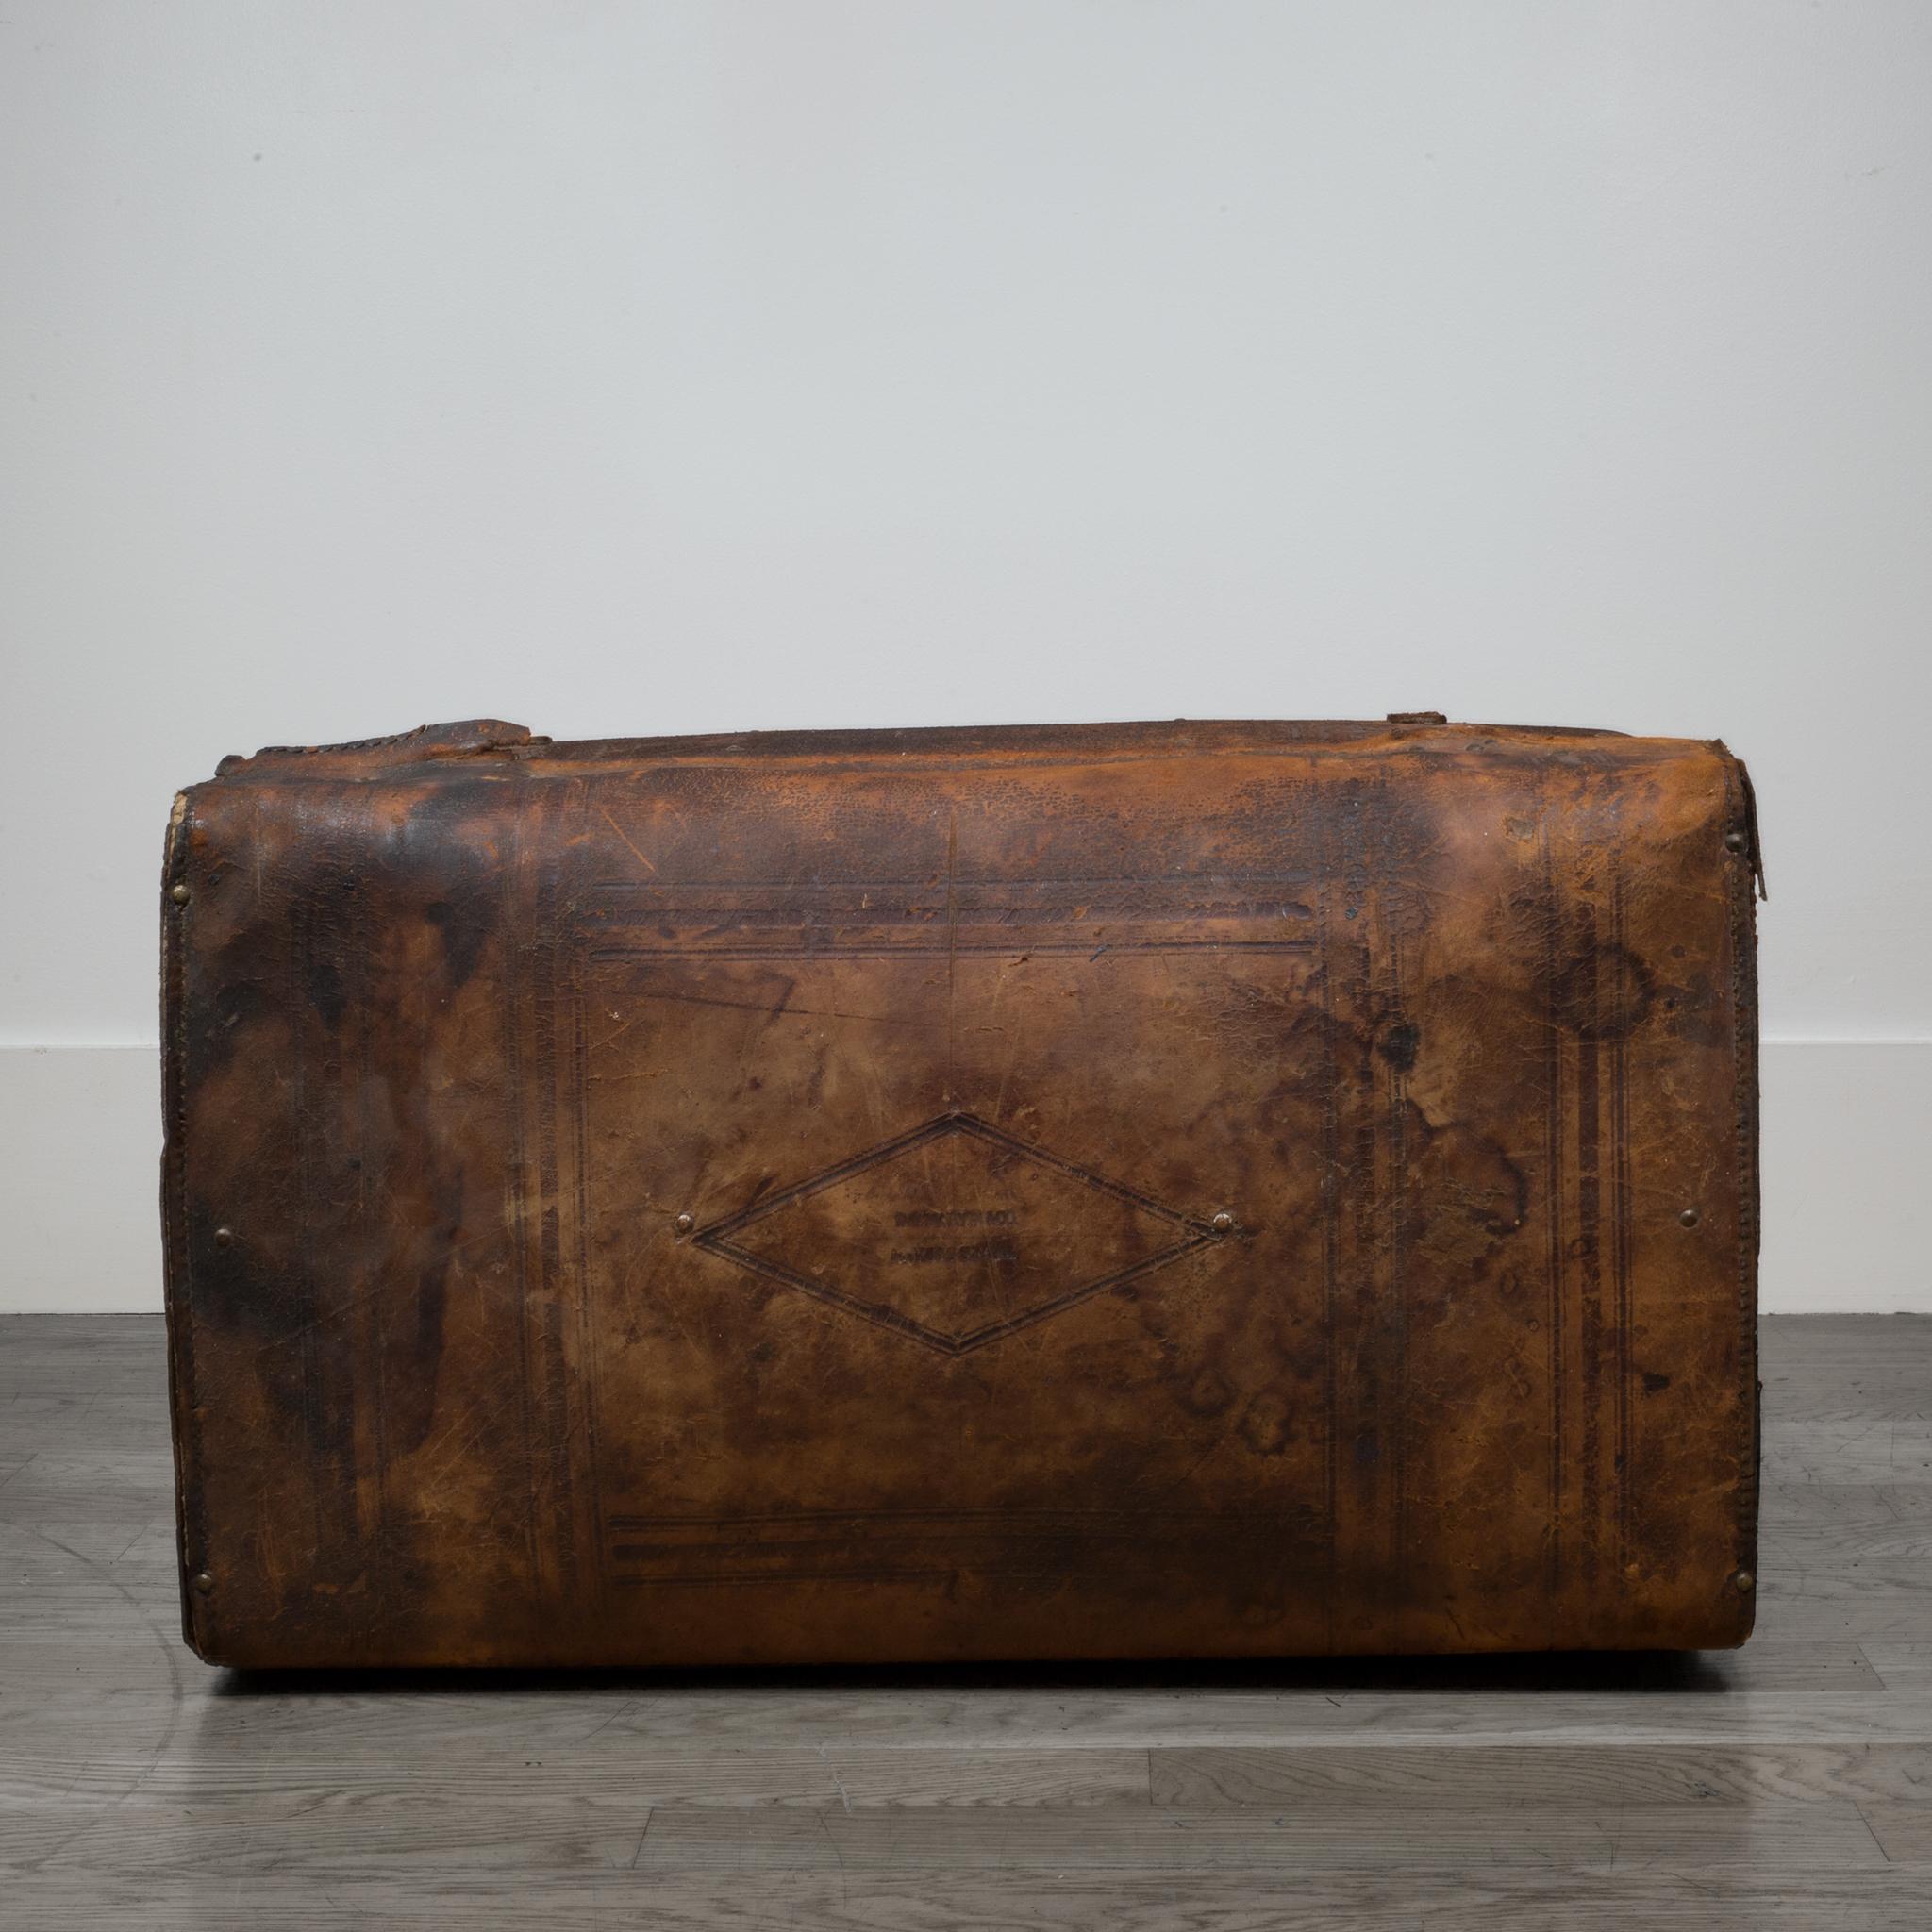 19th Century Embossed Leather and Brass Trunk by Martin & Co. San Francisco c.1850-1890